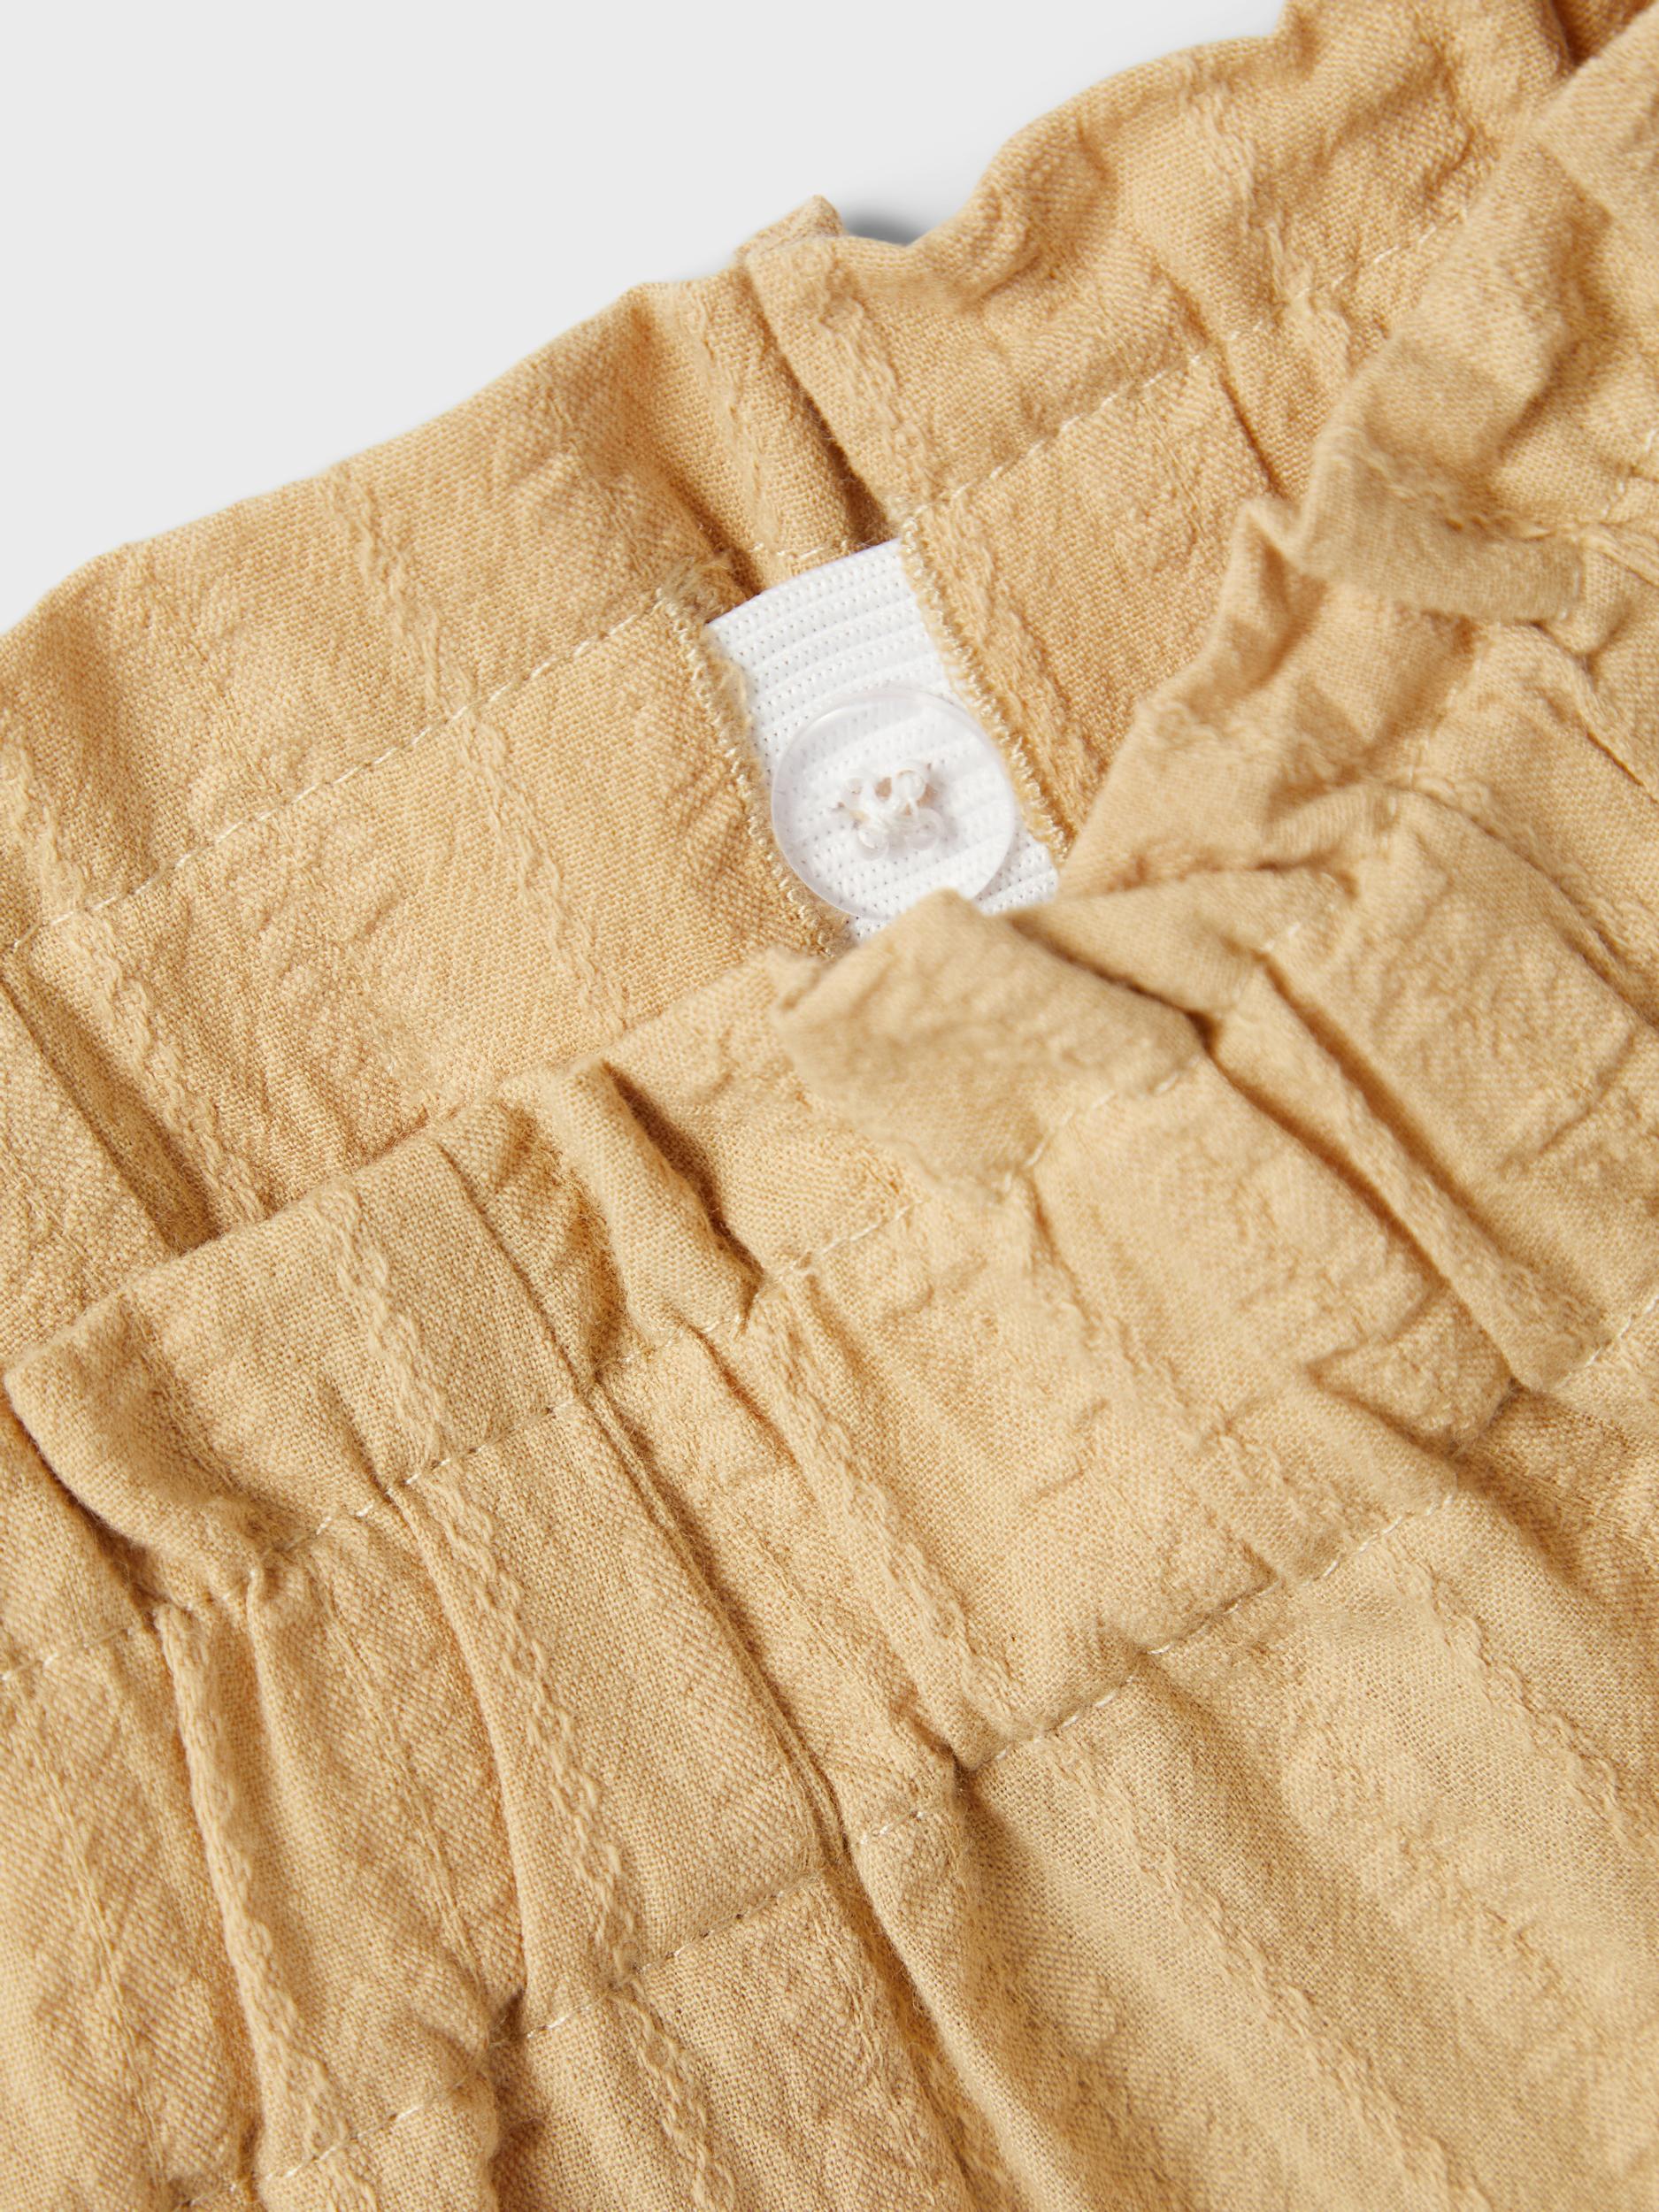 Lil Atelier Shorts Taupe